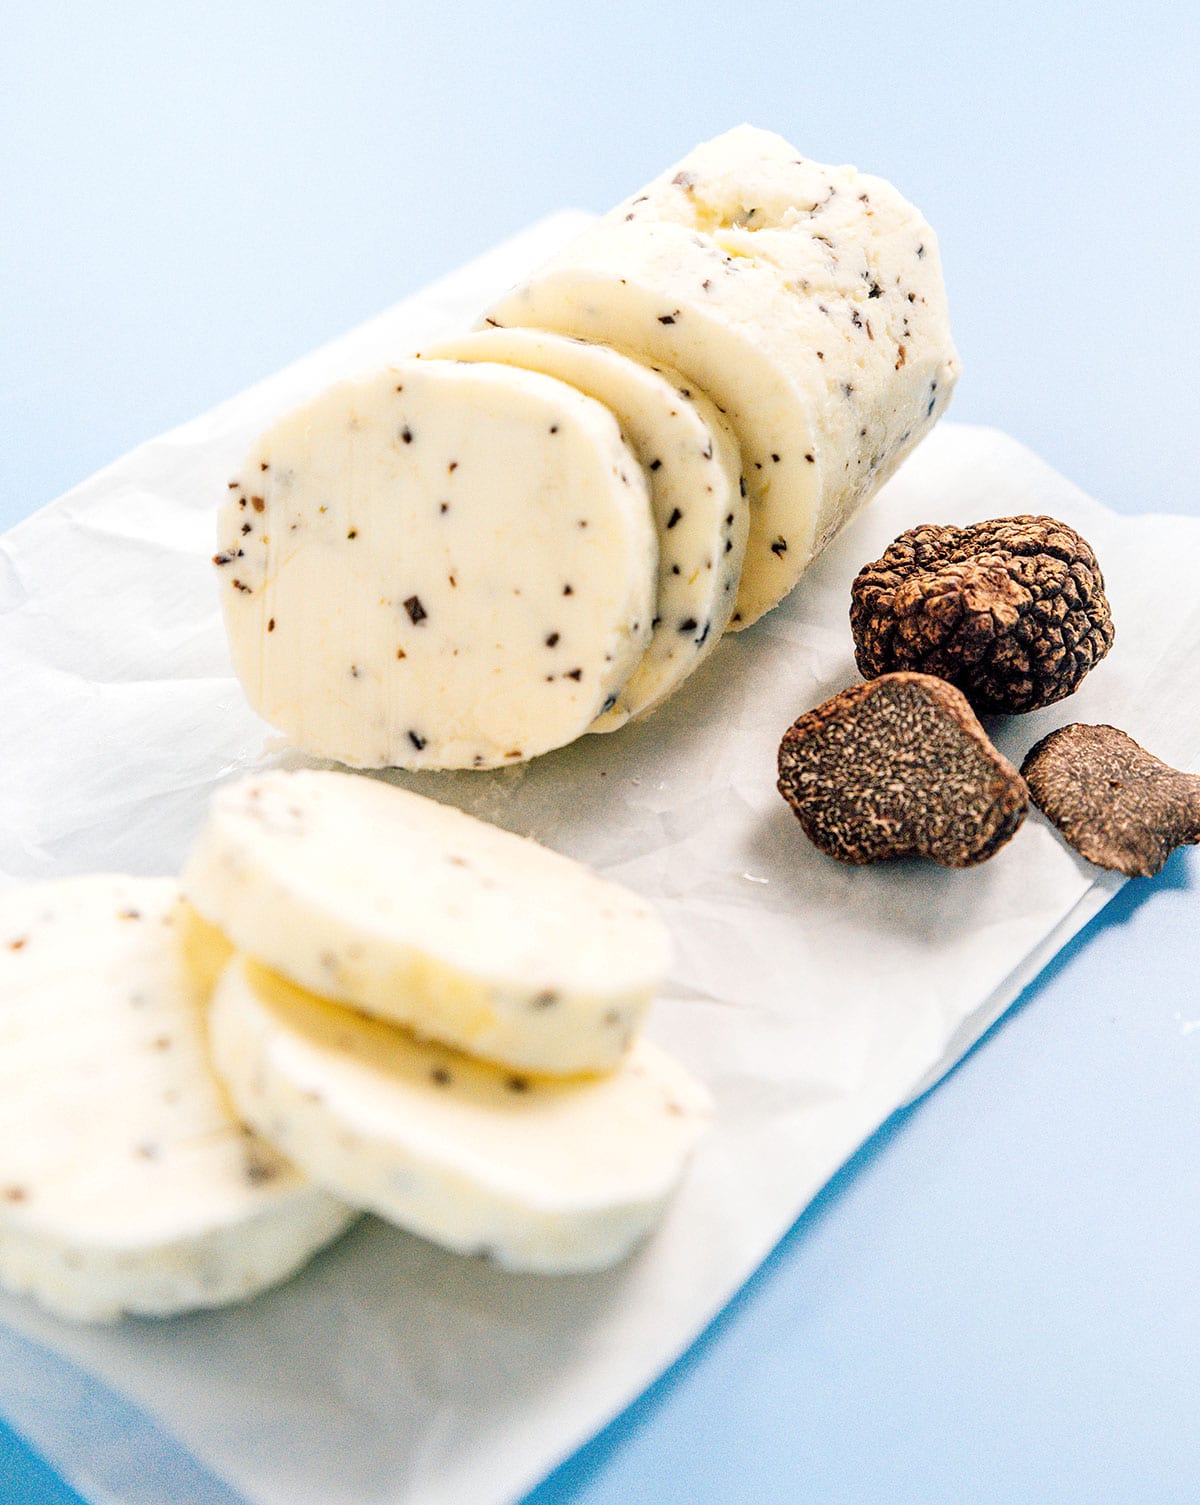 A roll of truffle butter sitting on top of a piece of parchment paper beside a couple of black truffles